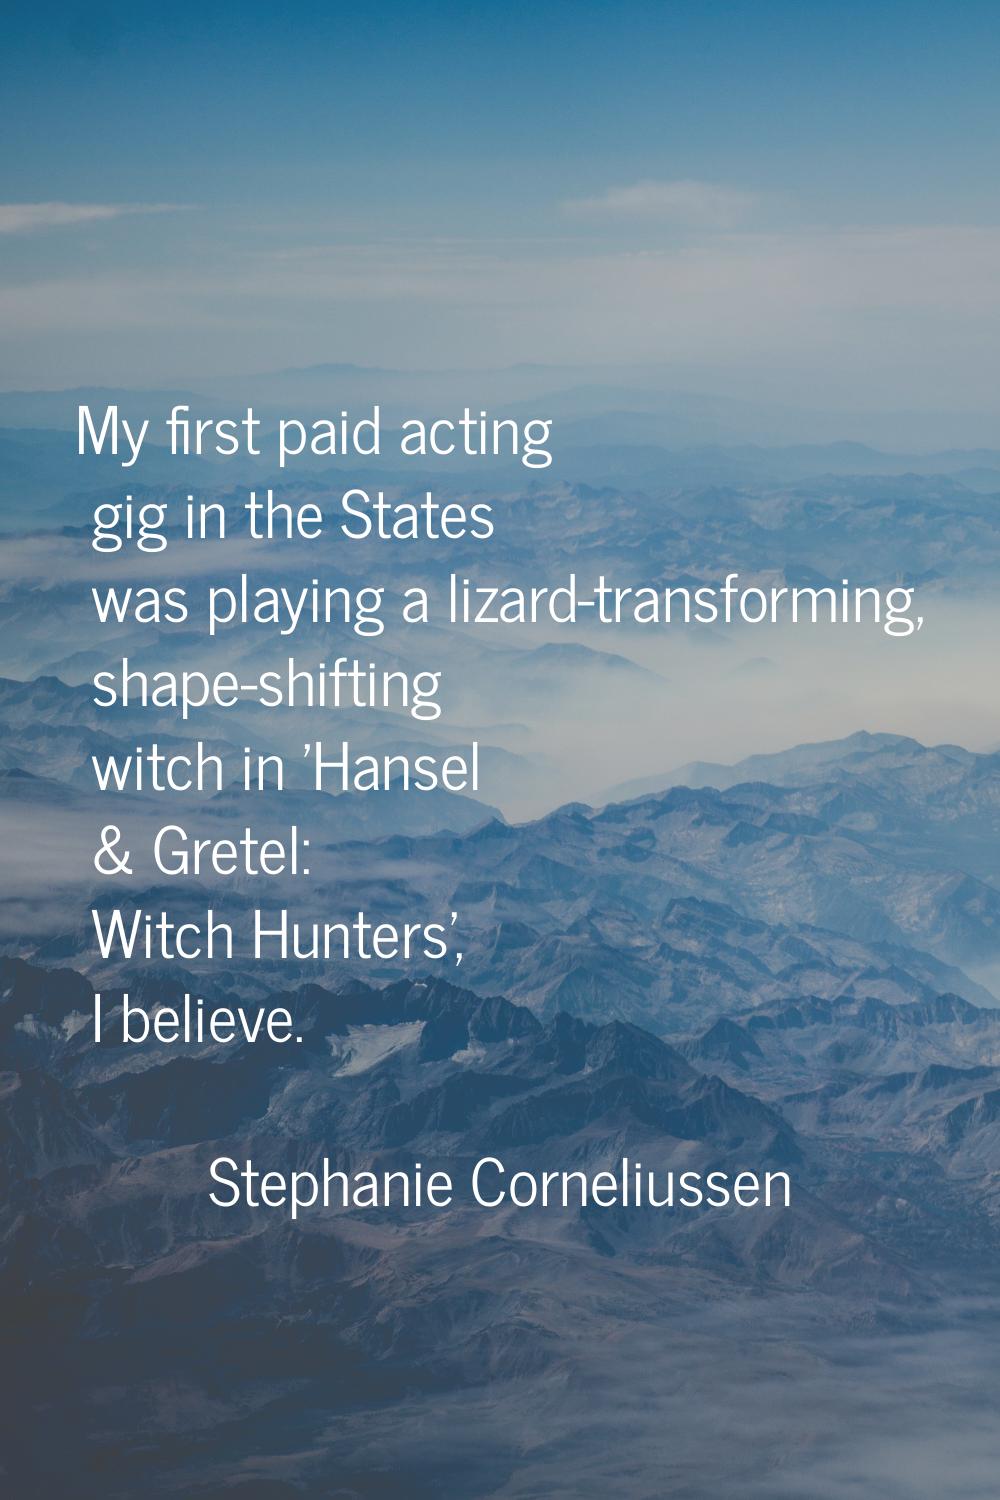 My first paid acting gig in the States was playing a lizard-transforming, shape-shifting witch in '